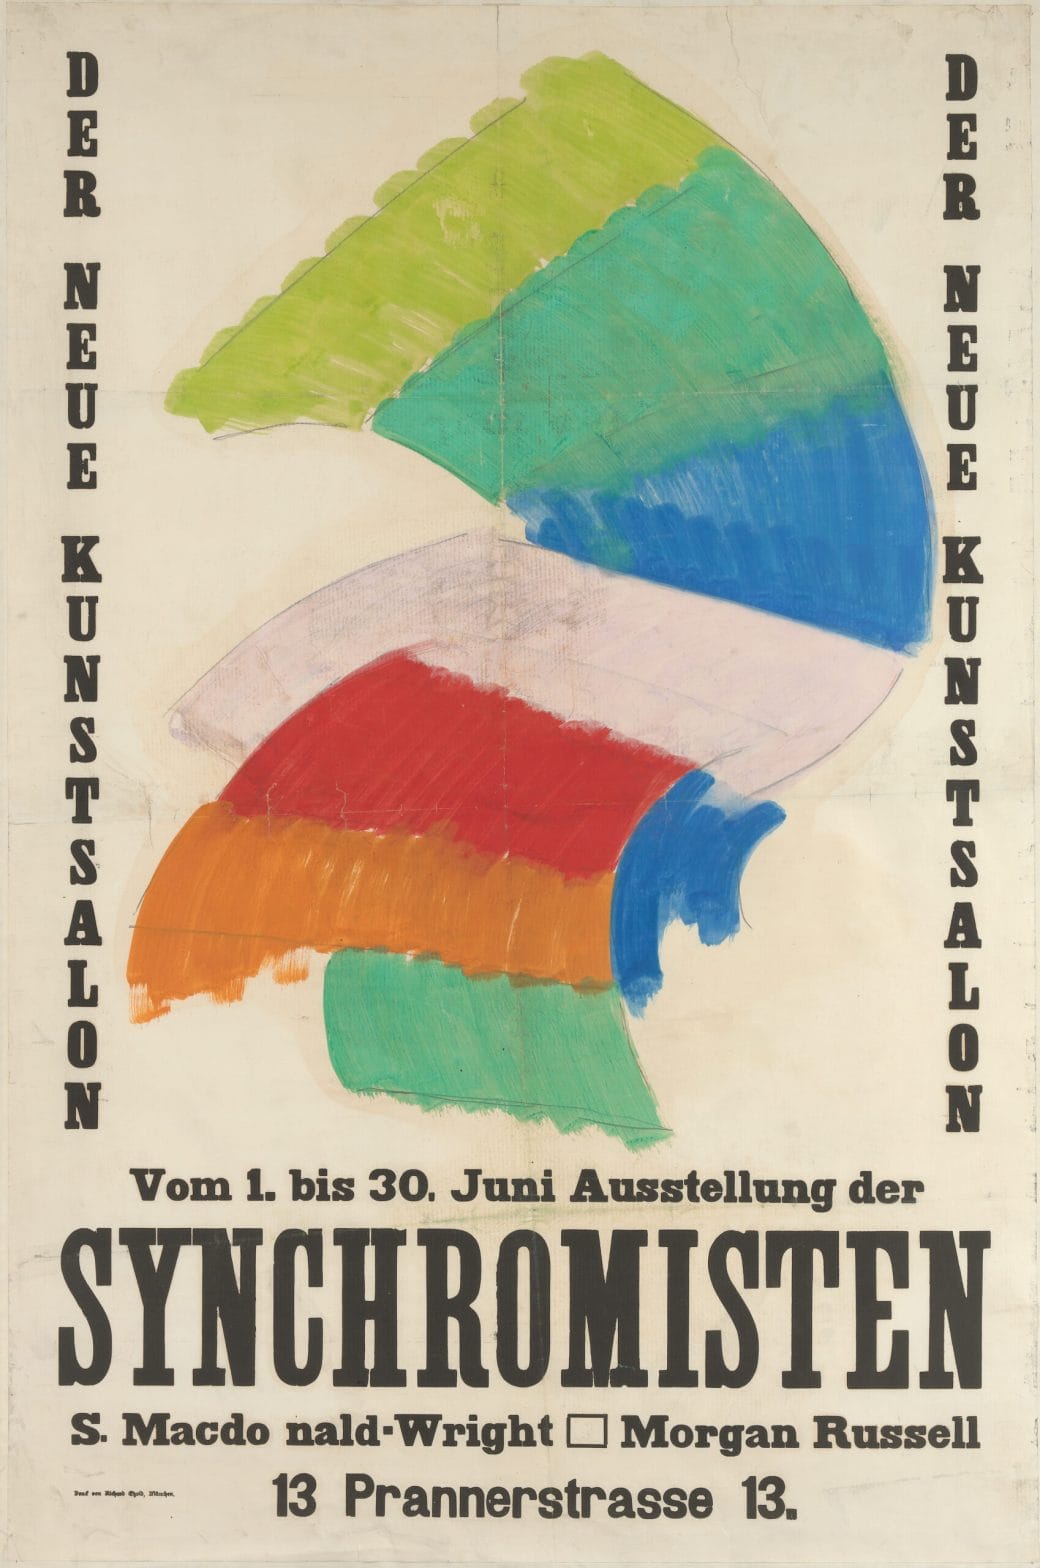 A German poster promoting the artists' exhibition with a wave of striped color panels centered among the text.